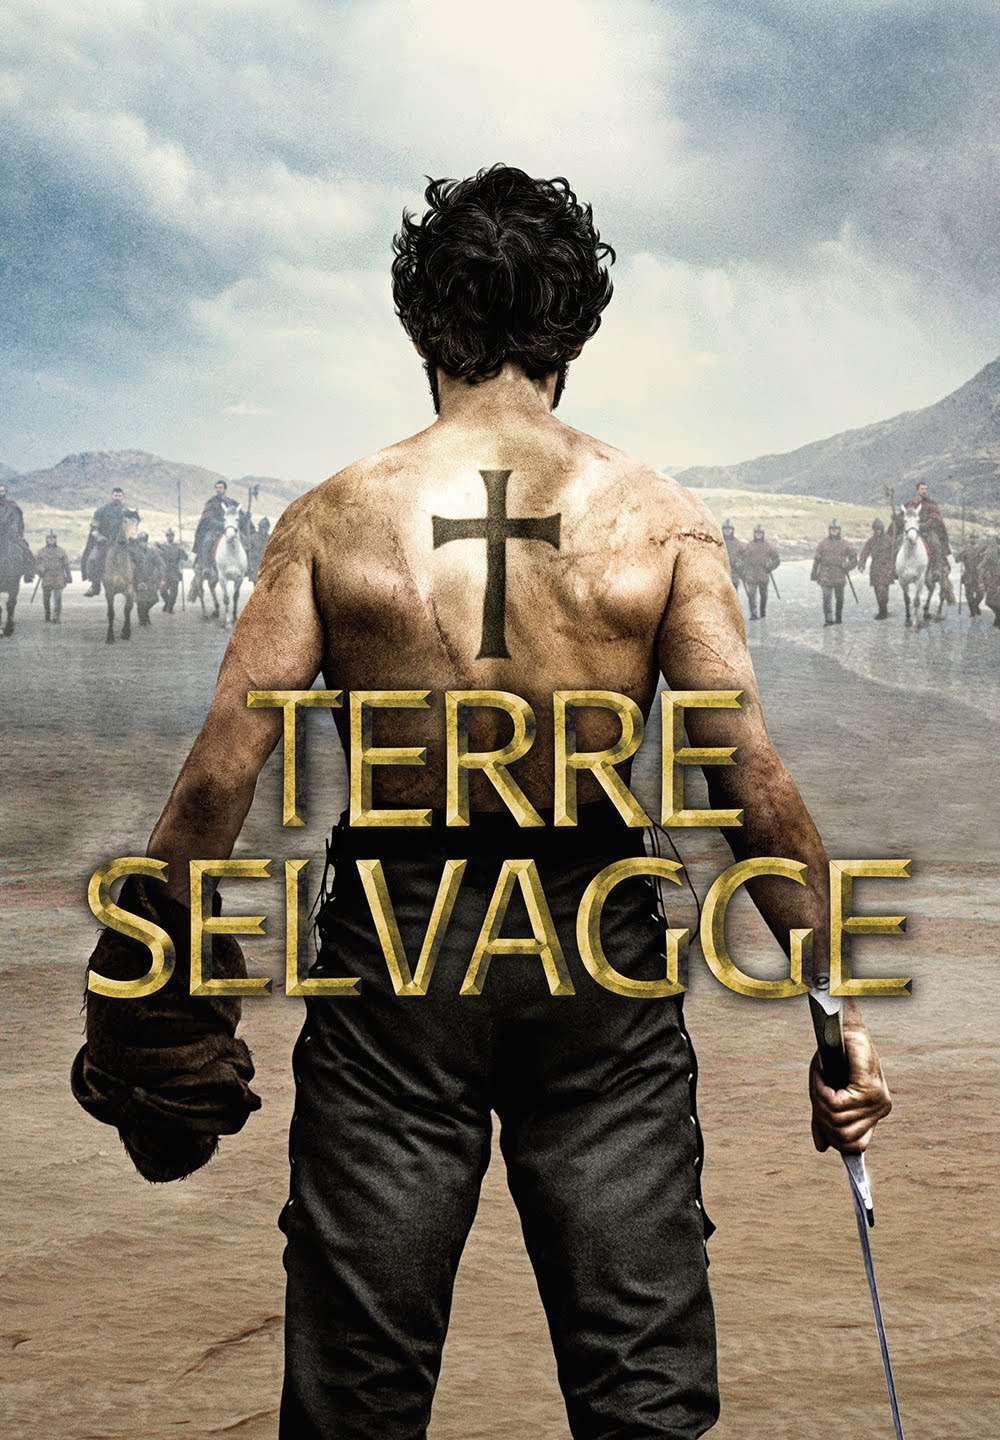 Terre selvagge [HD] (2017)